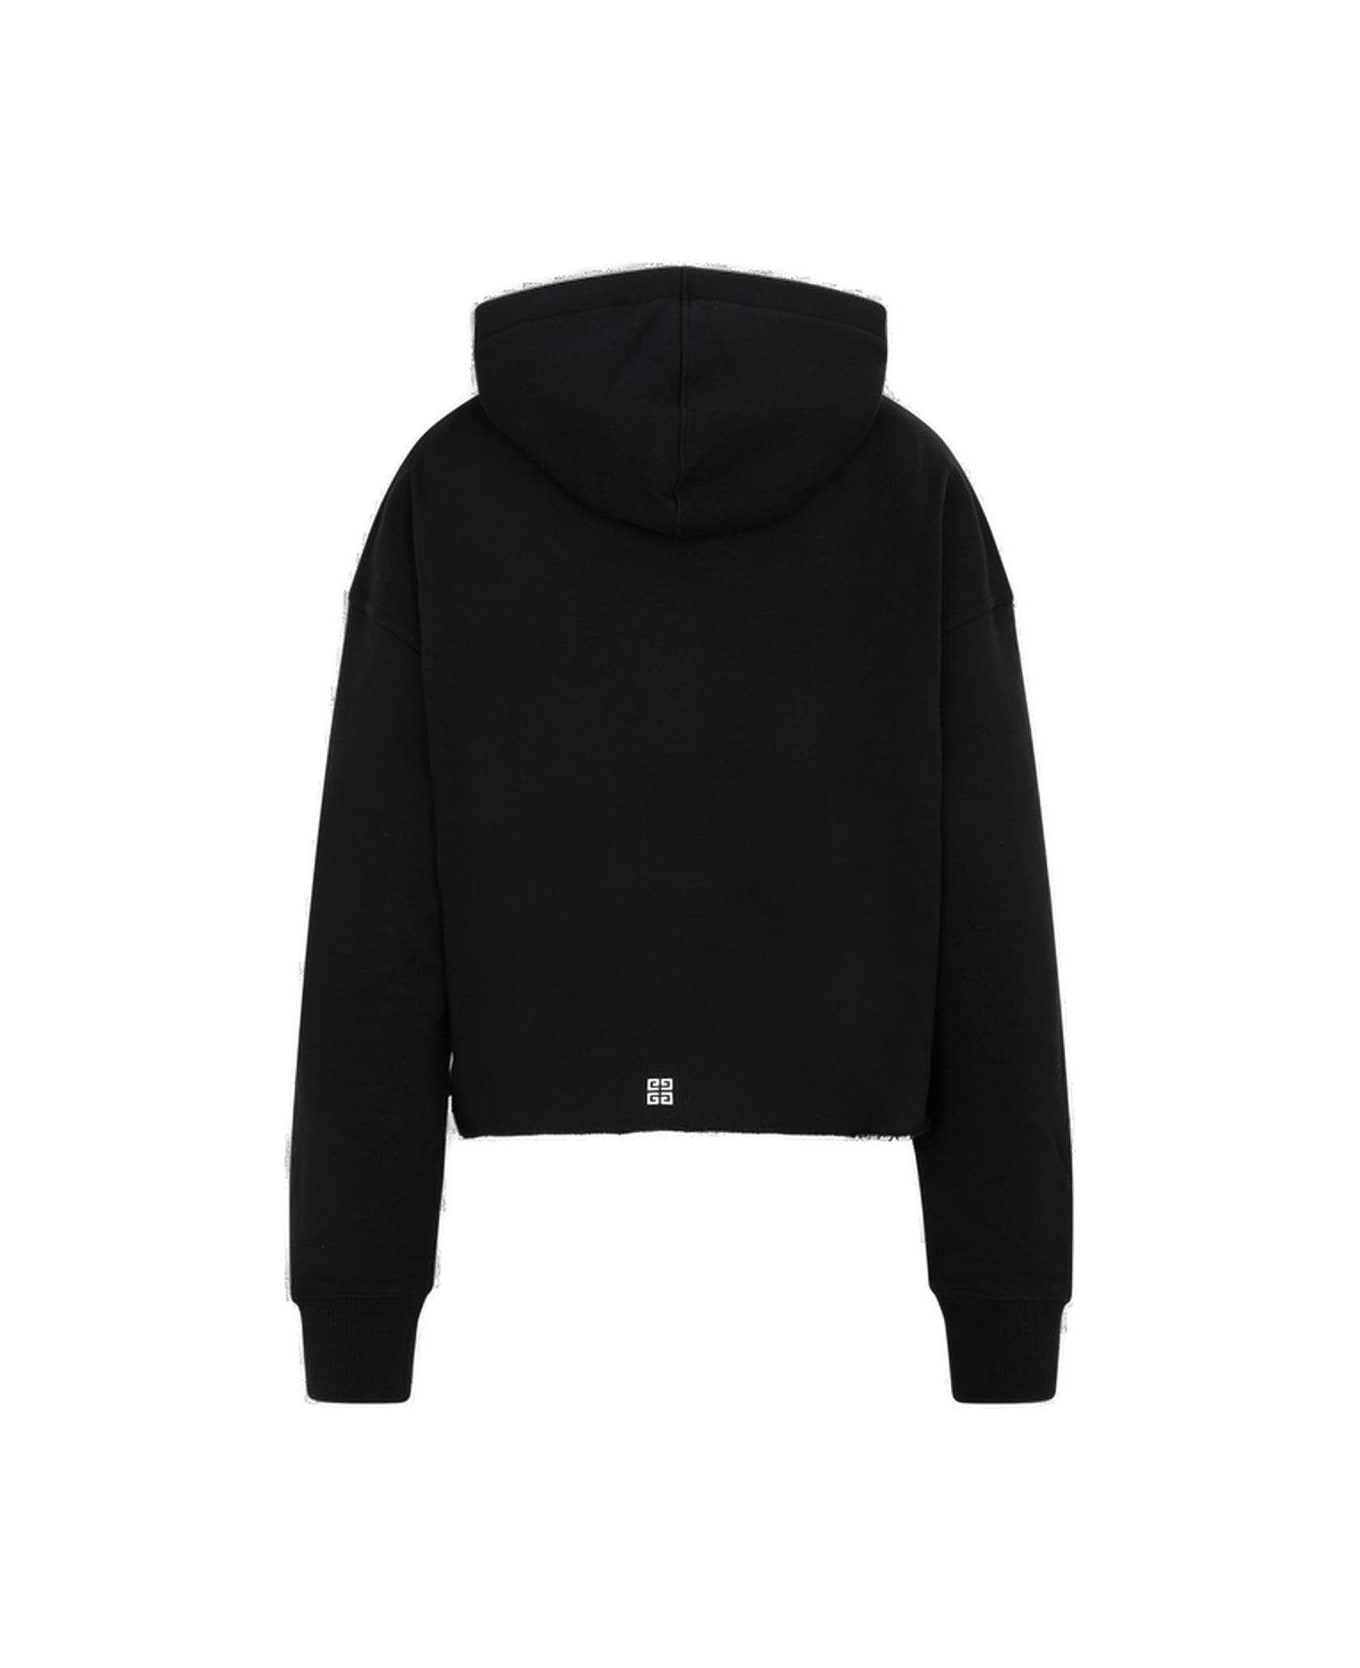 Givenchy Cotton Hoodie - Black フリース